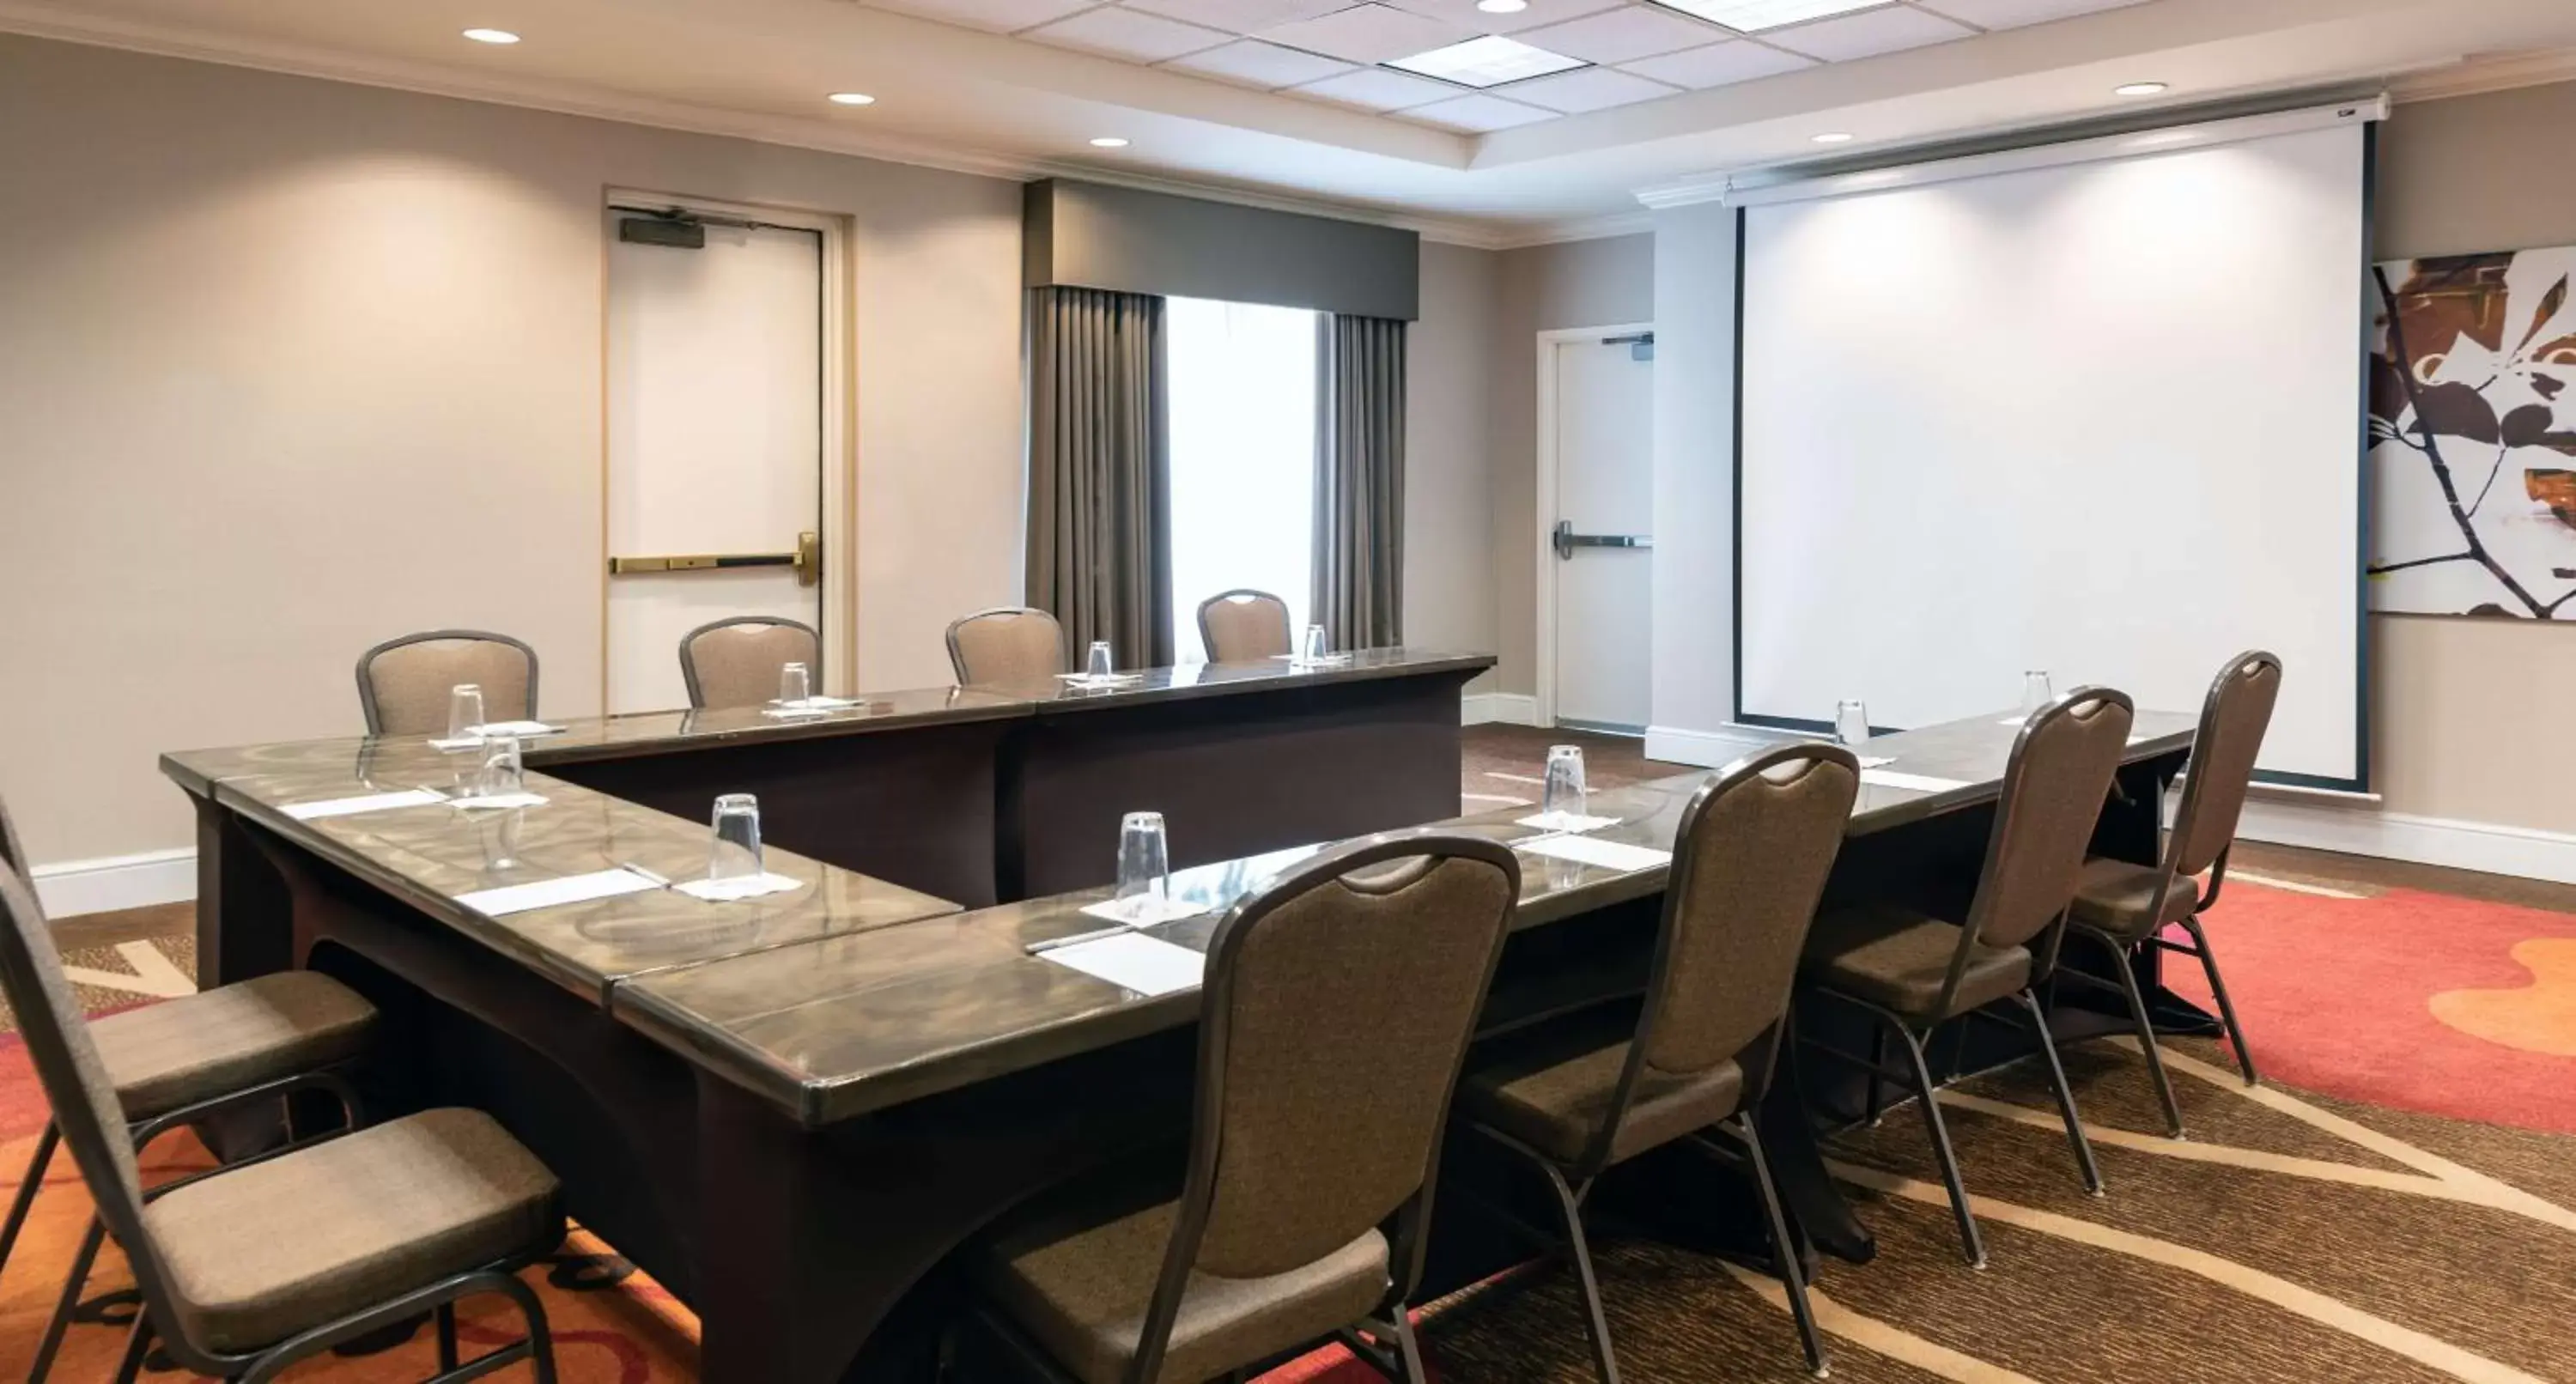 Meeting/conference room in Hilton Garden Inn BWI Airport